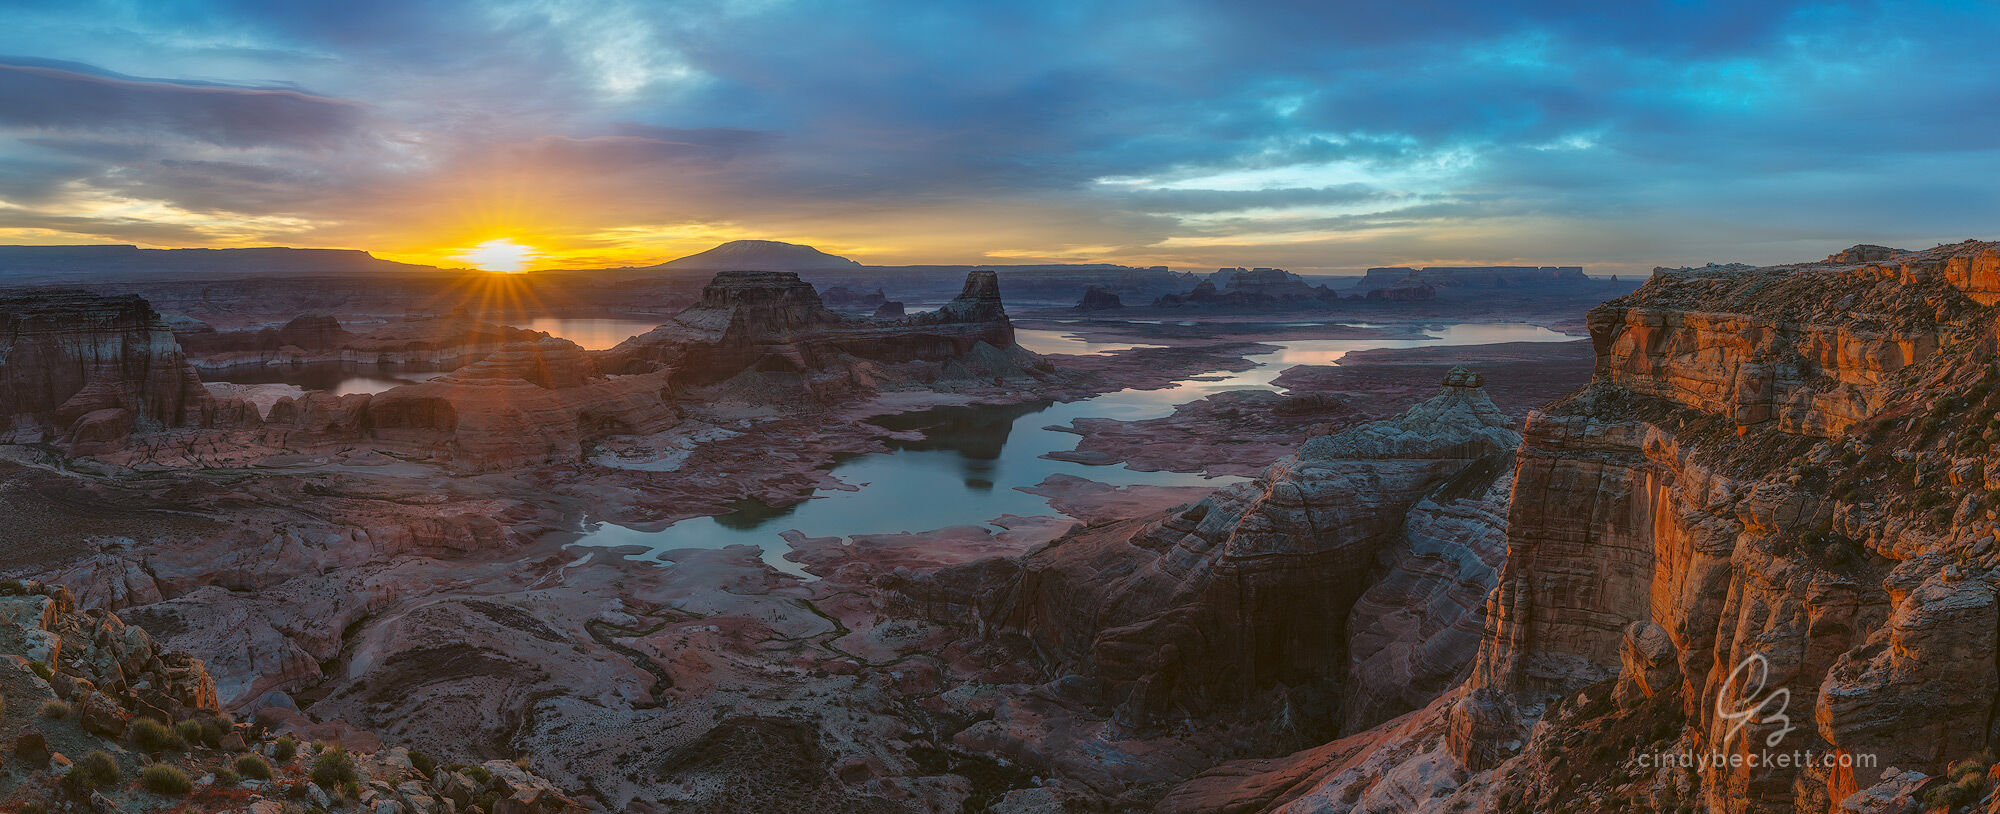 Sun beams breaking over the distant buttes and mesas of Glen Canyon cast warm light on the scene around Gunsight Butte and the waters of Lake Powell. 